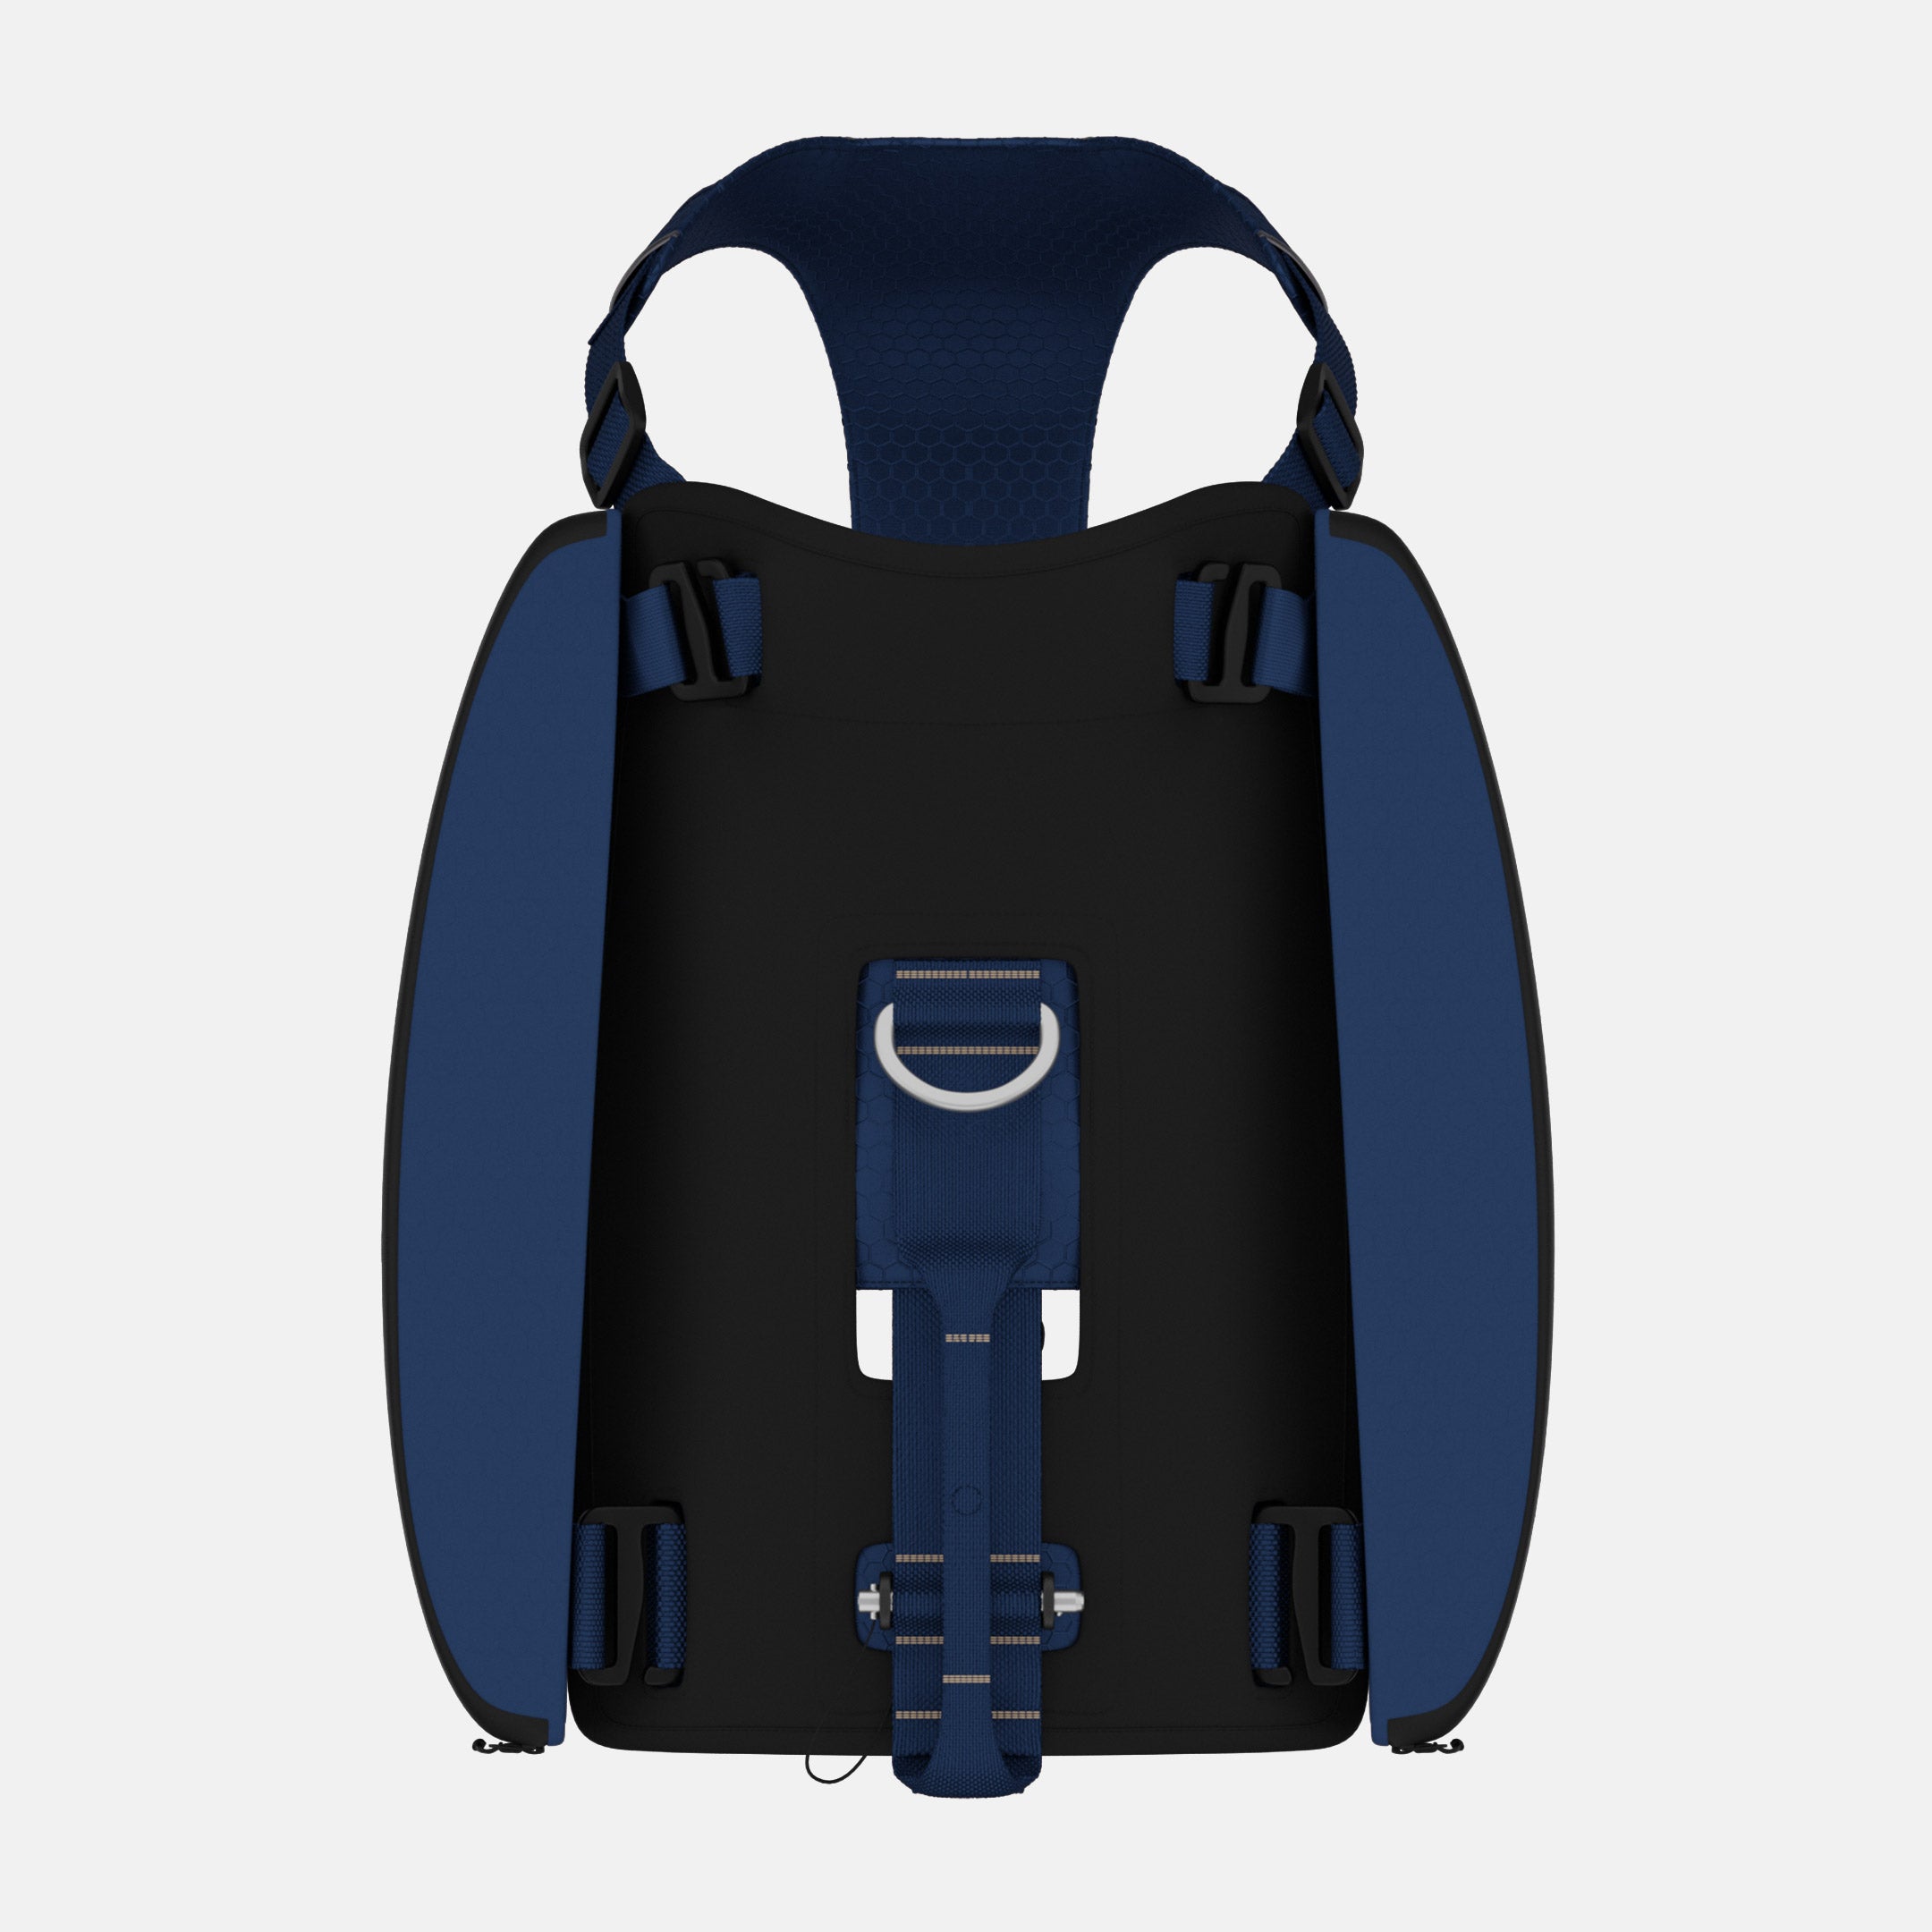 Top view of Canyon Light Pack in Peak Blue, size M